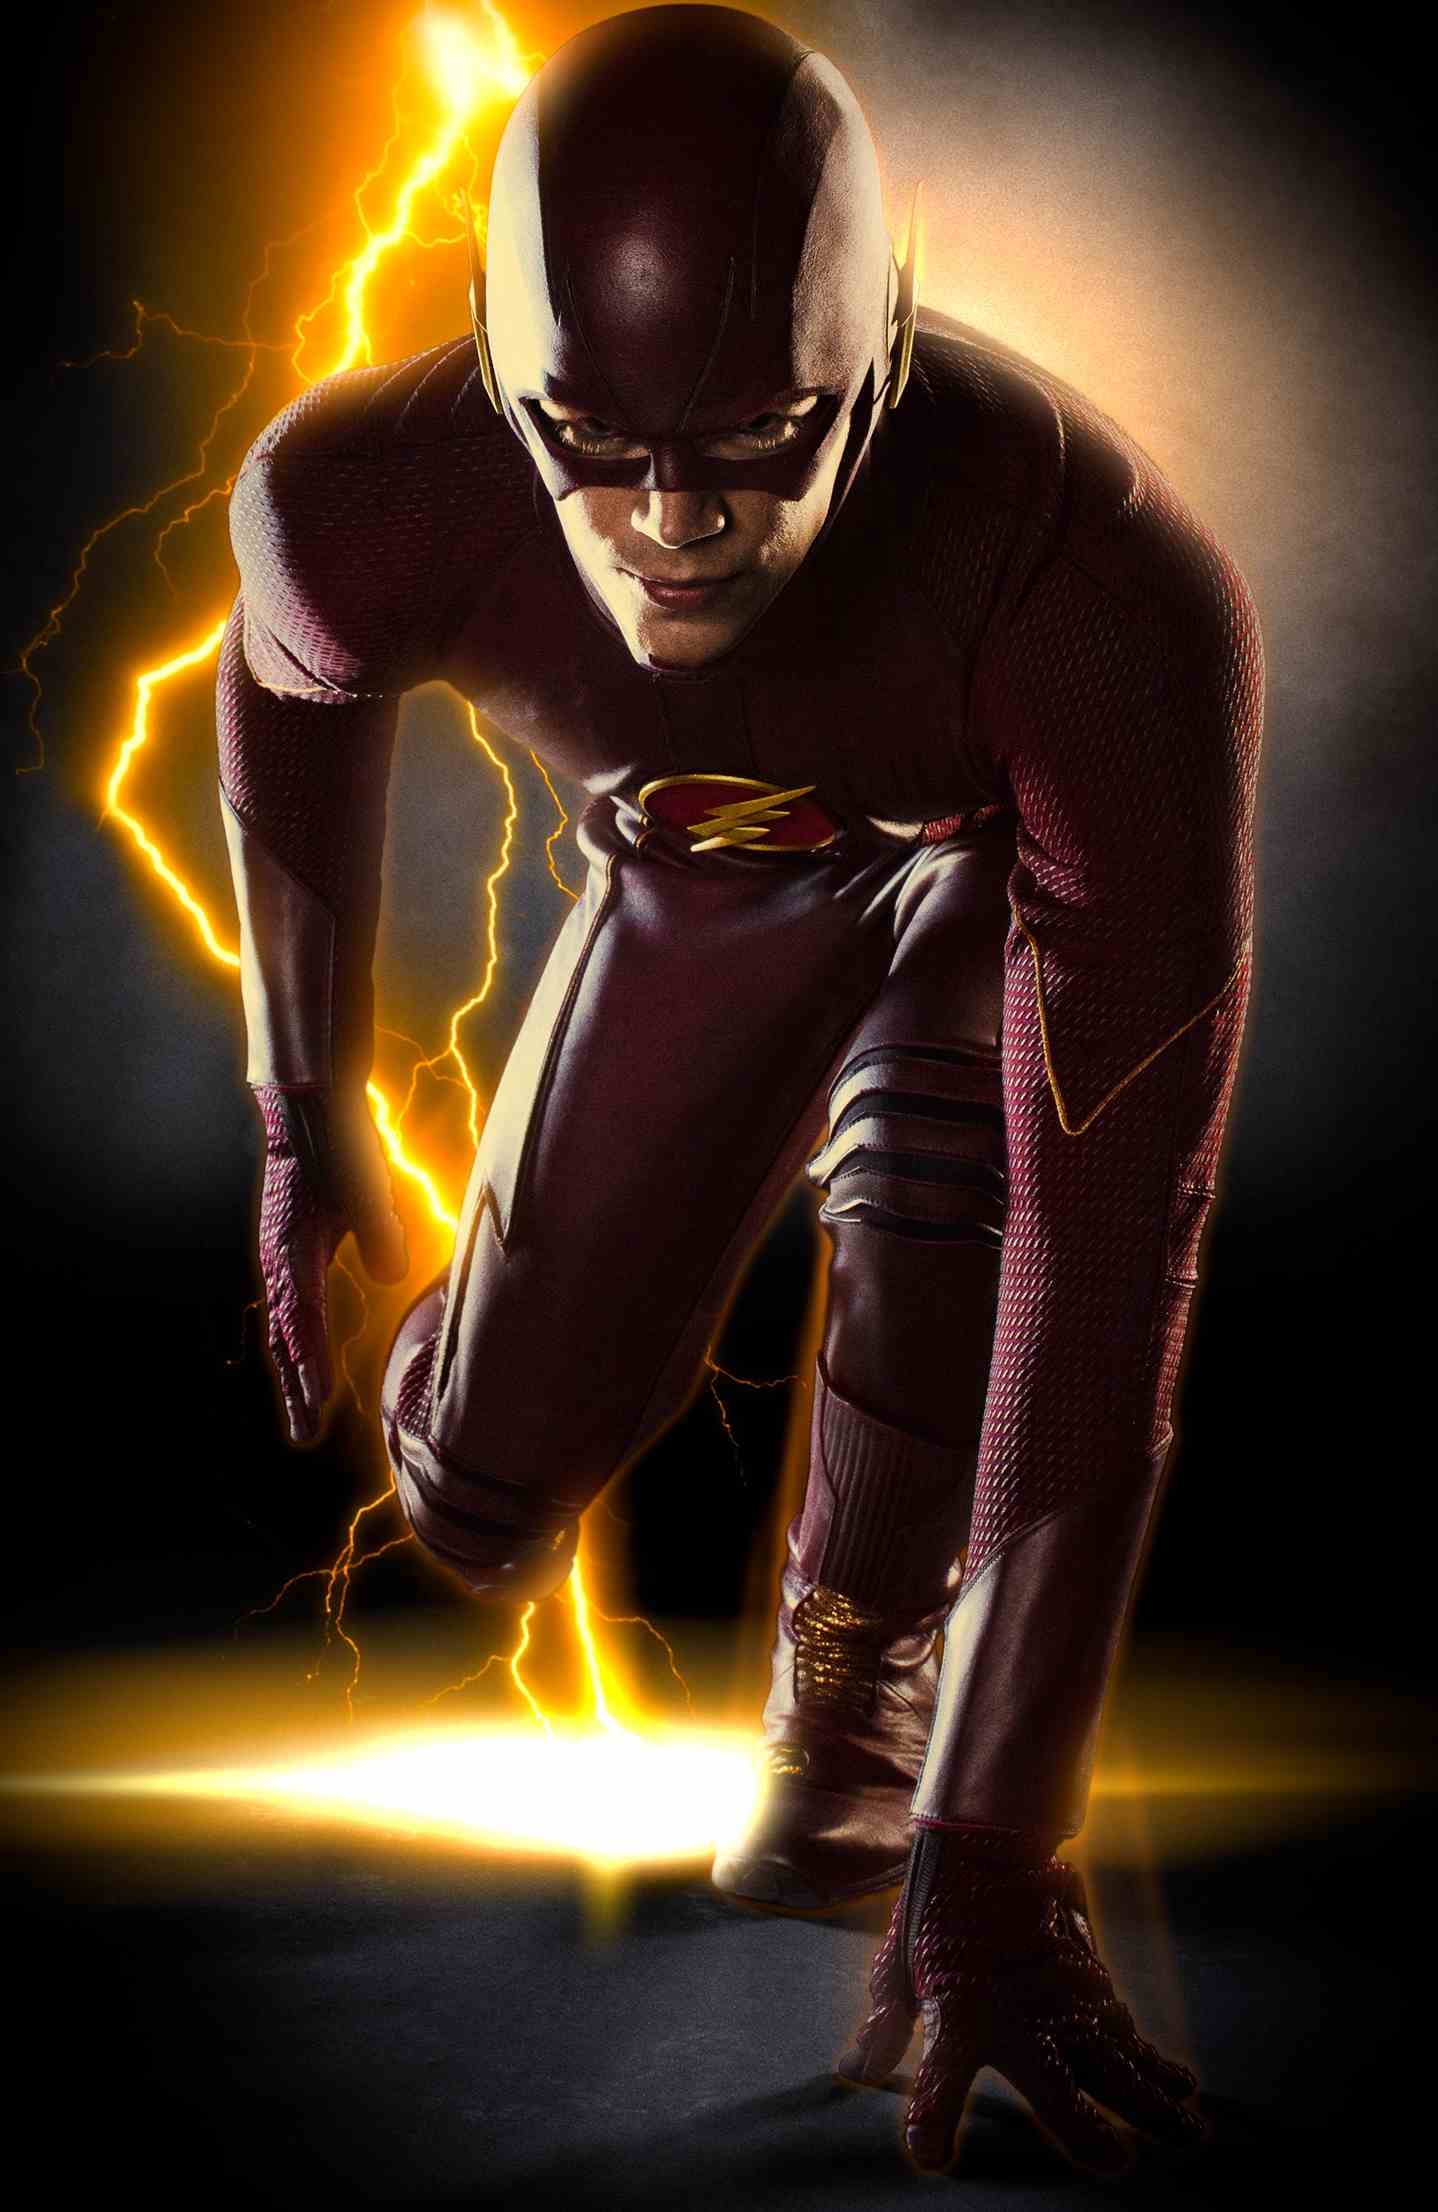 The Flash images The Flash first full body costume photo HD wallpaper and background photos